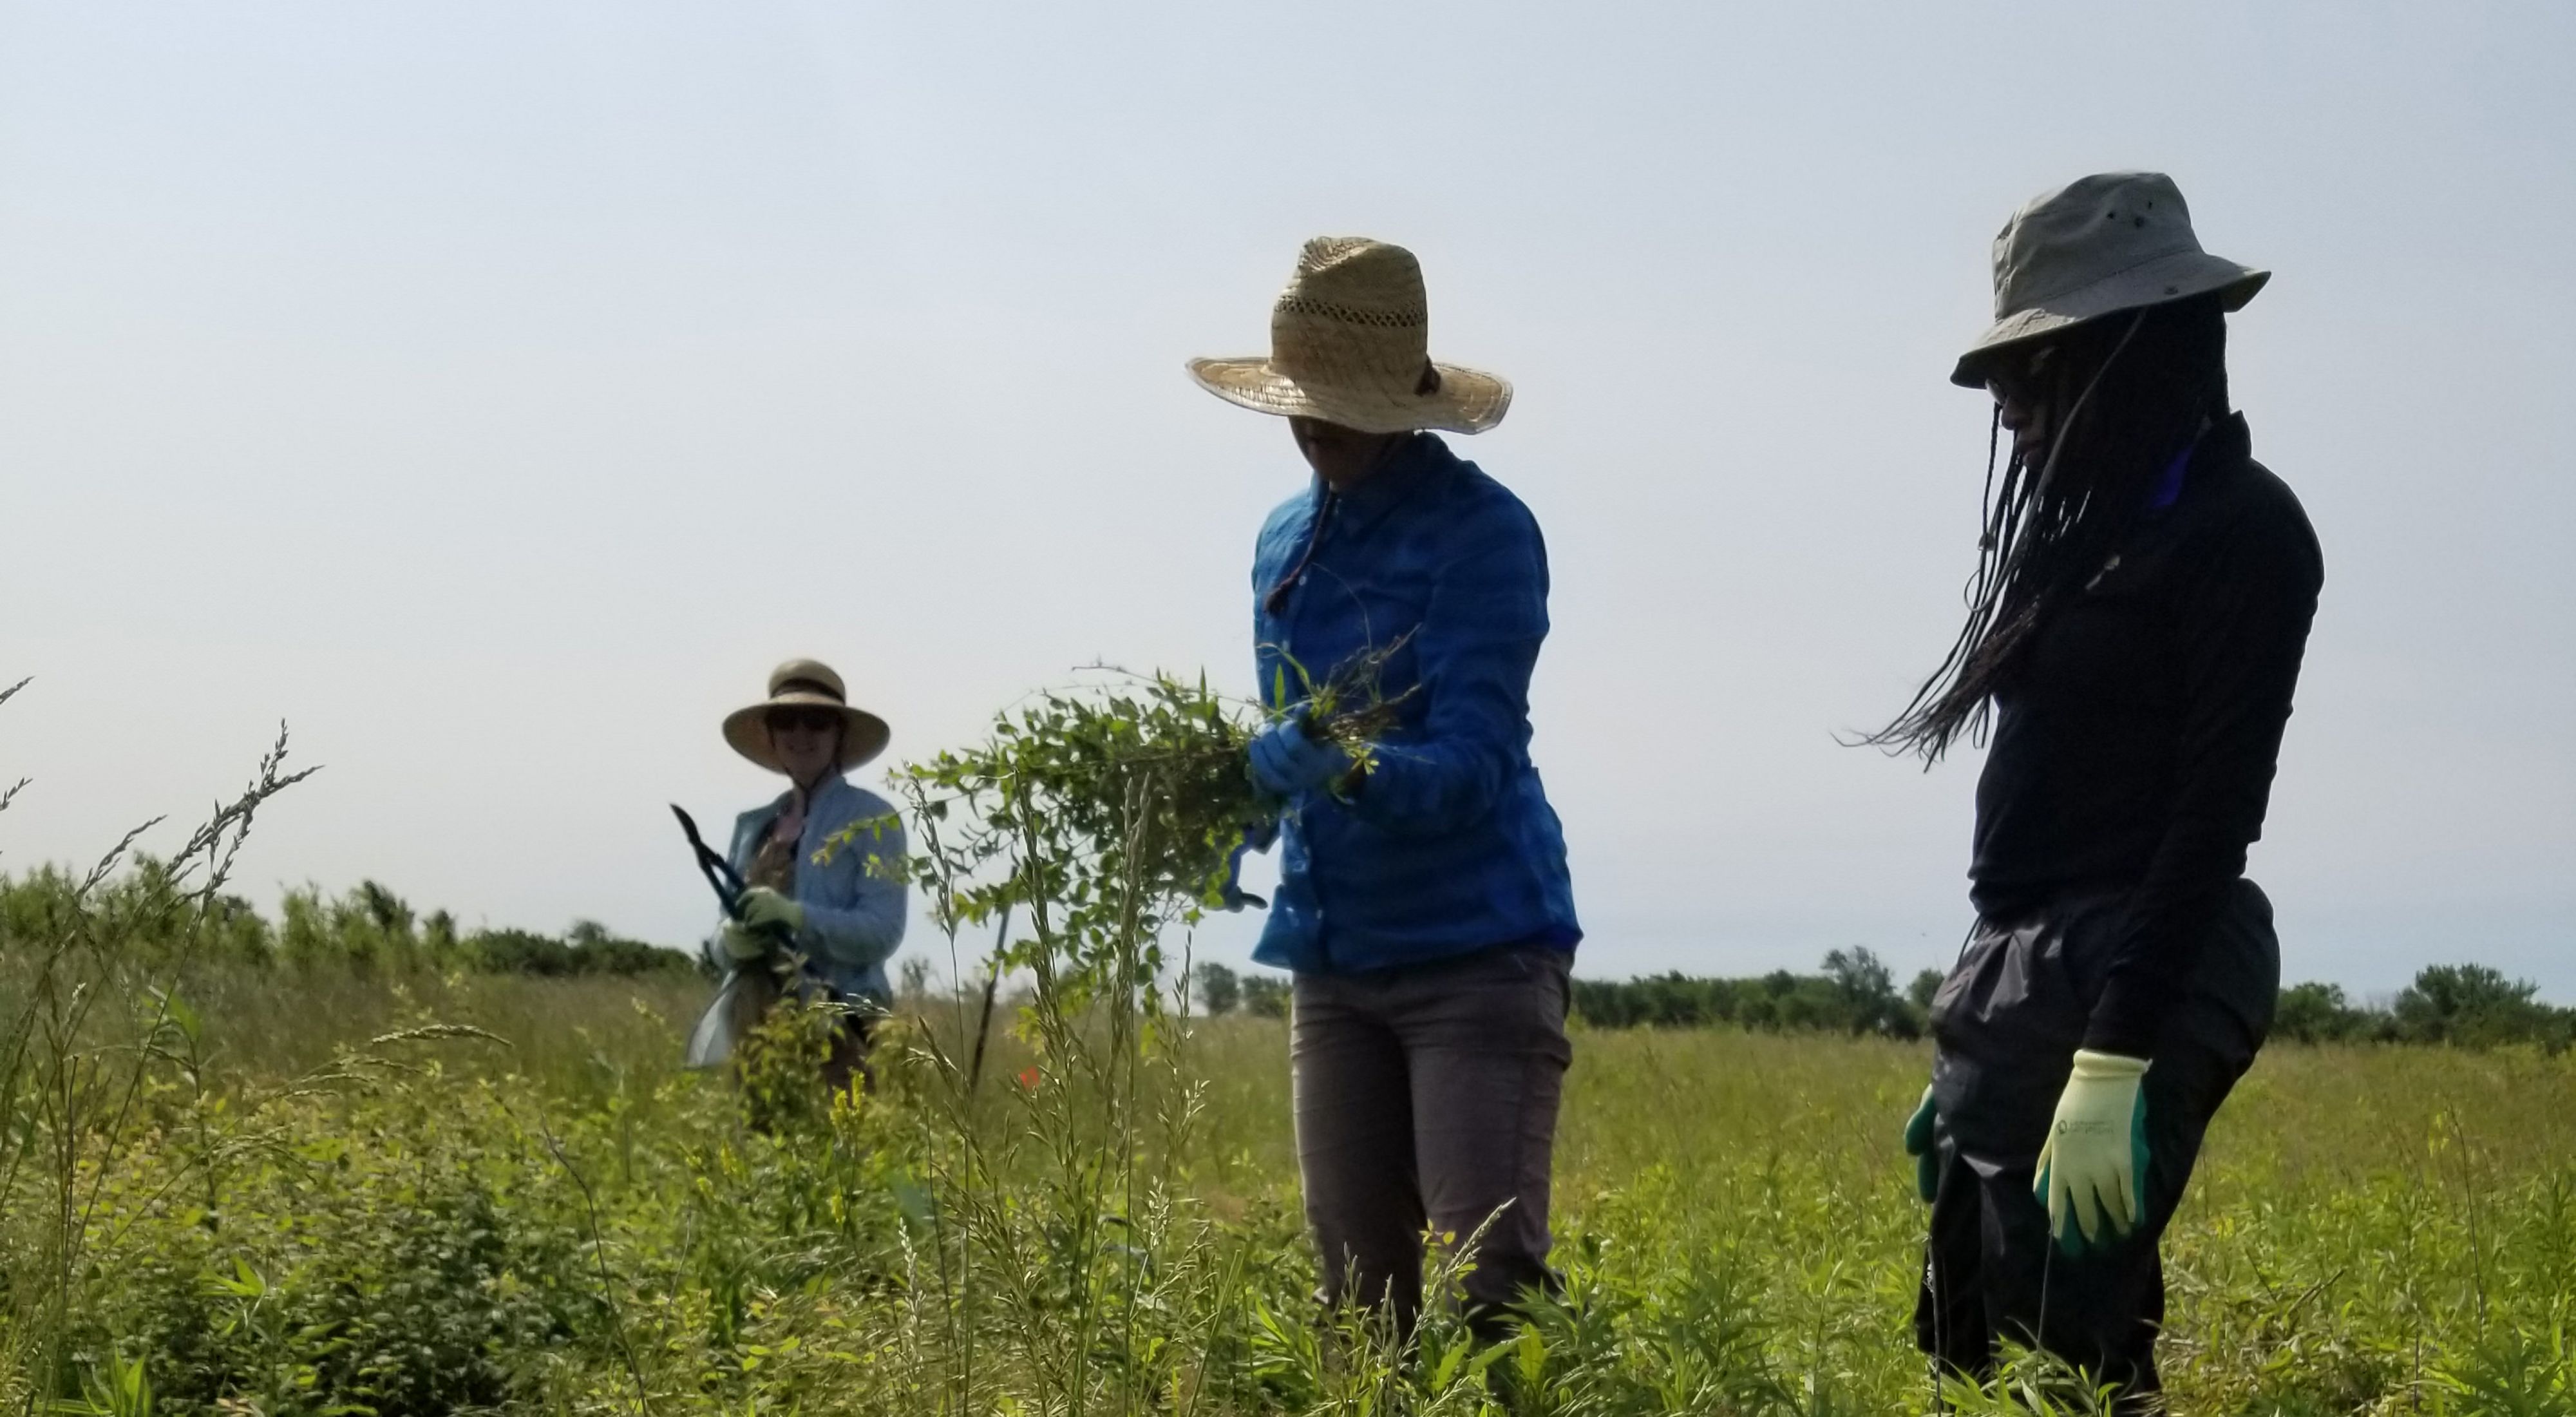 A group of volunteers clear invasive woody plants at Anderson County Prairies in Kansas.